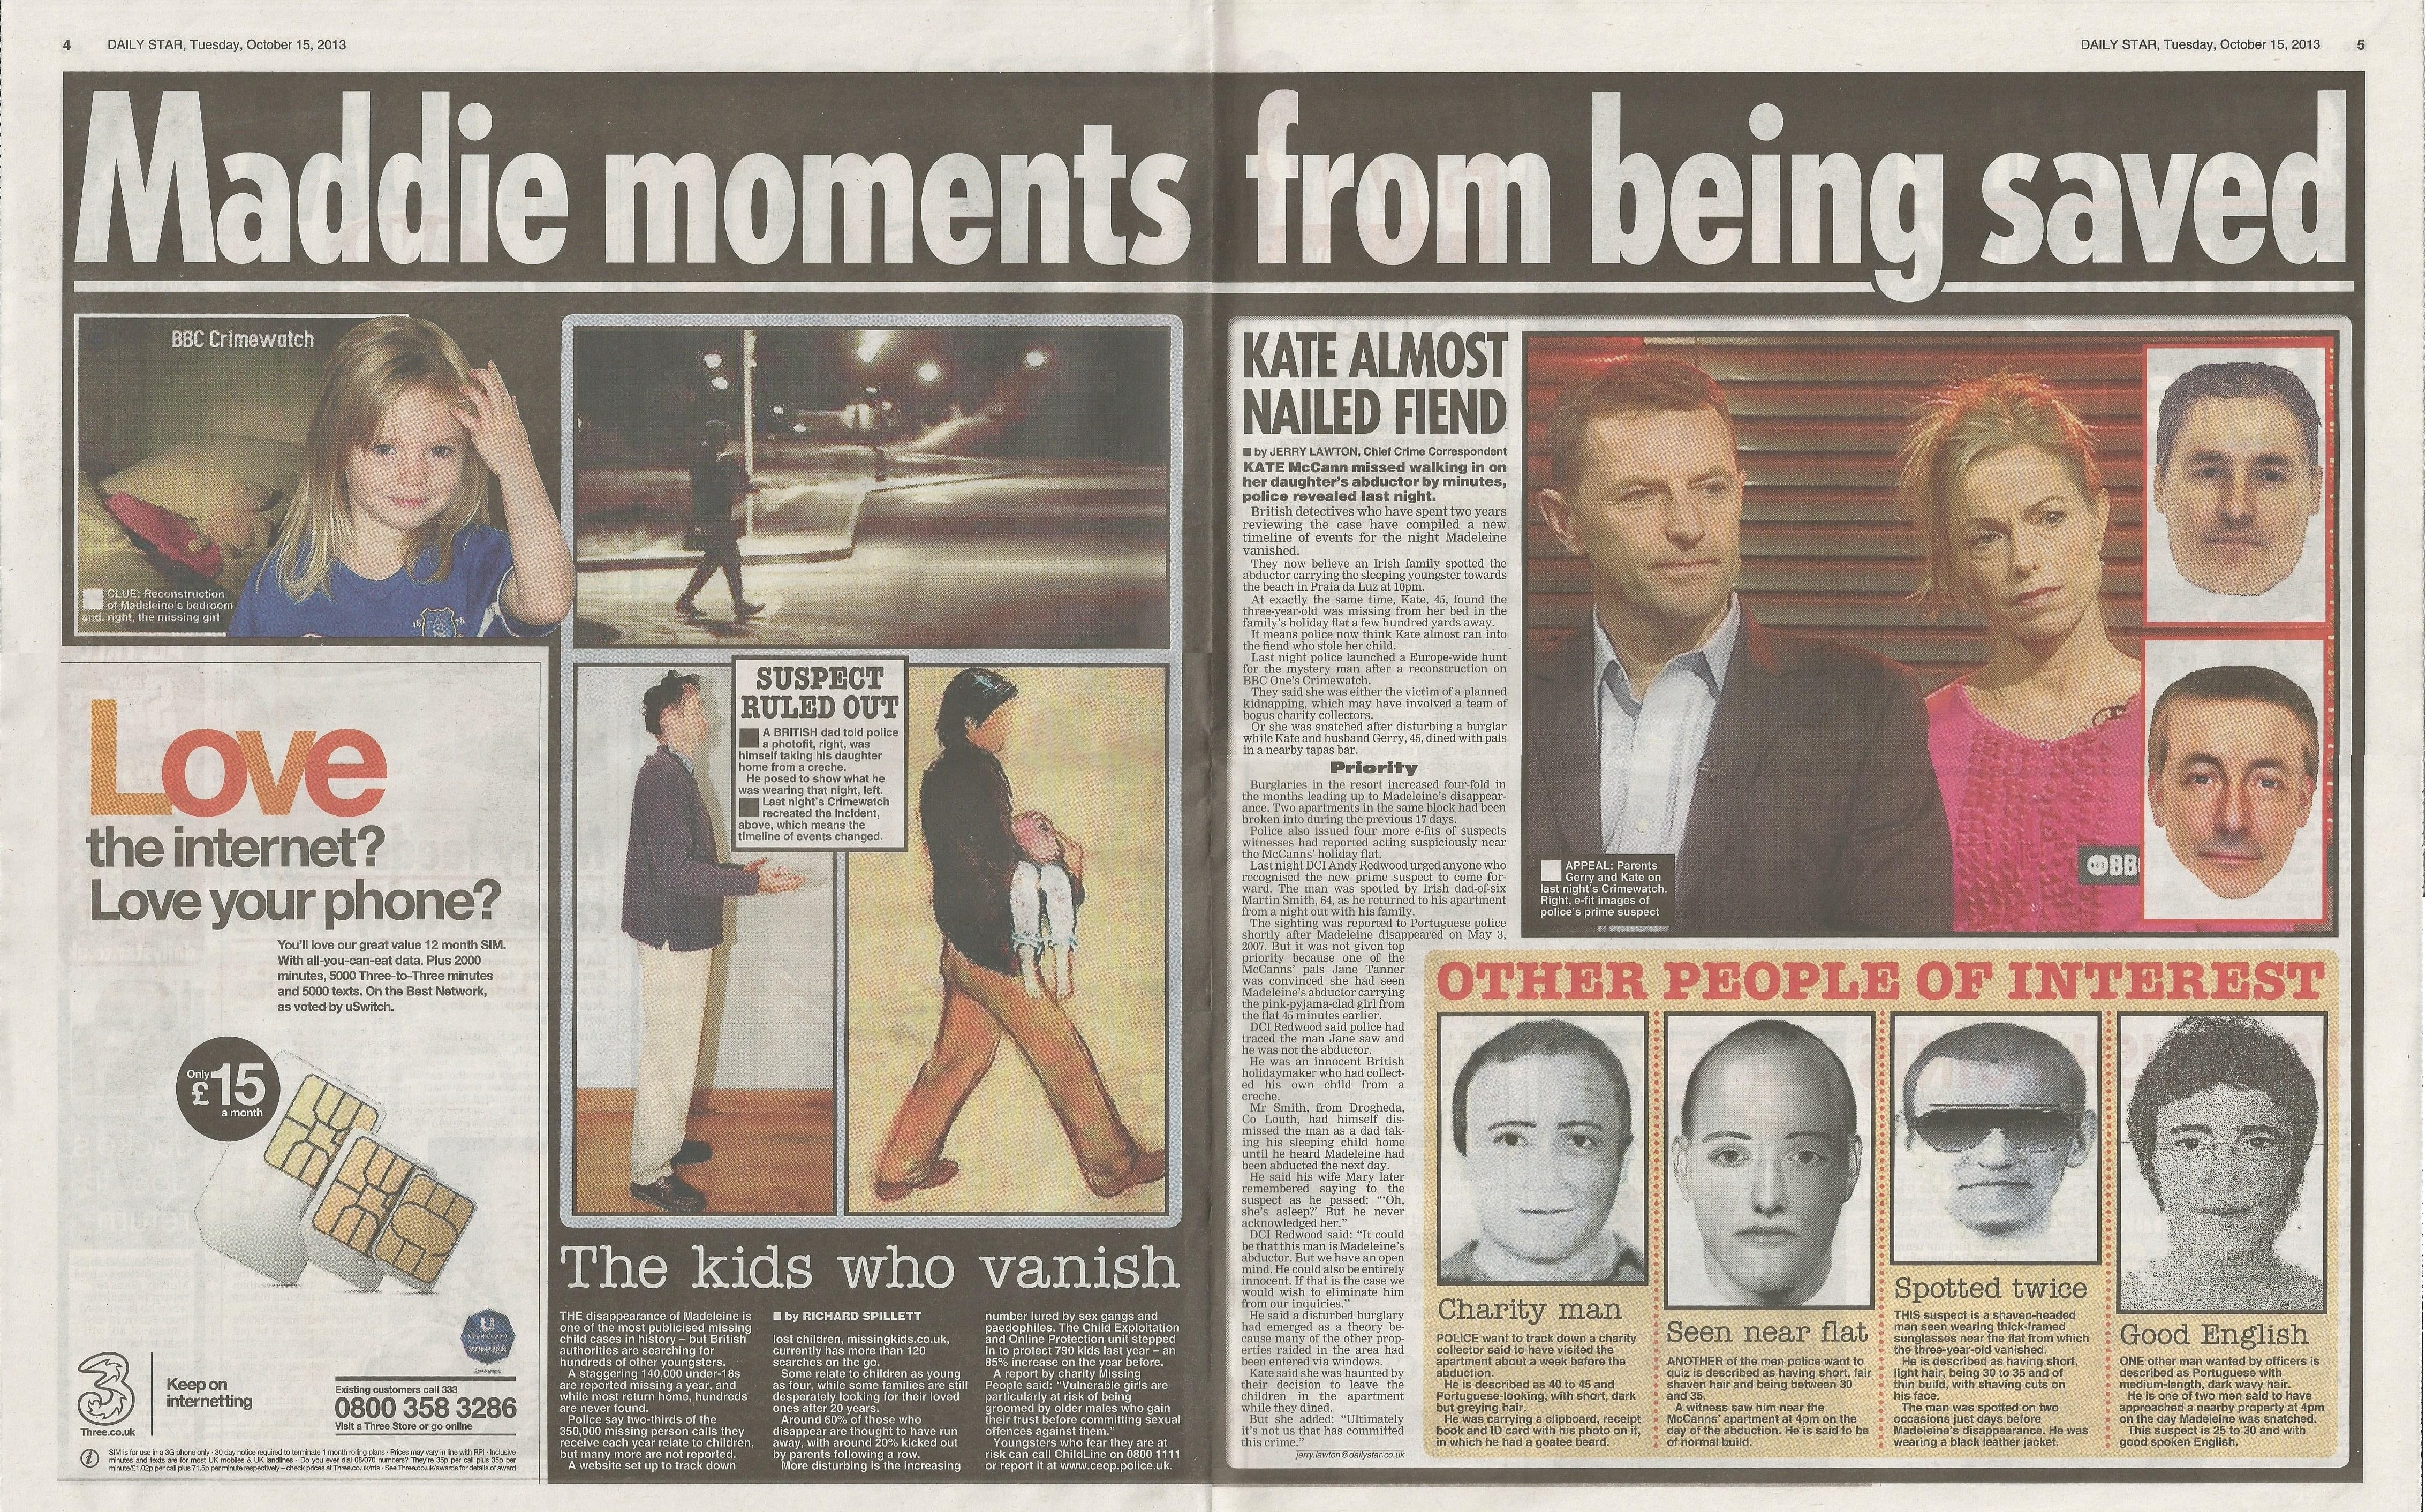 Daily Star, paper edition: 'Maddie moments from being saved', 15 October 2013